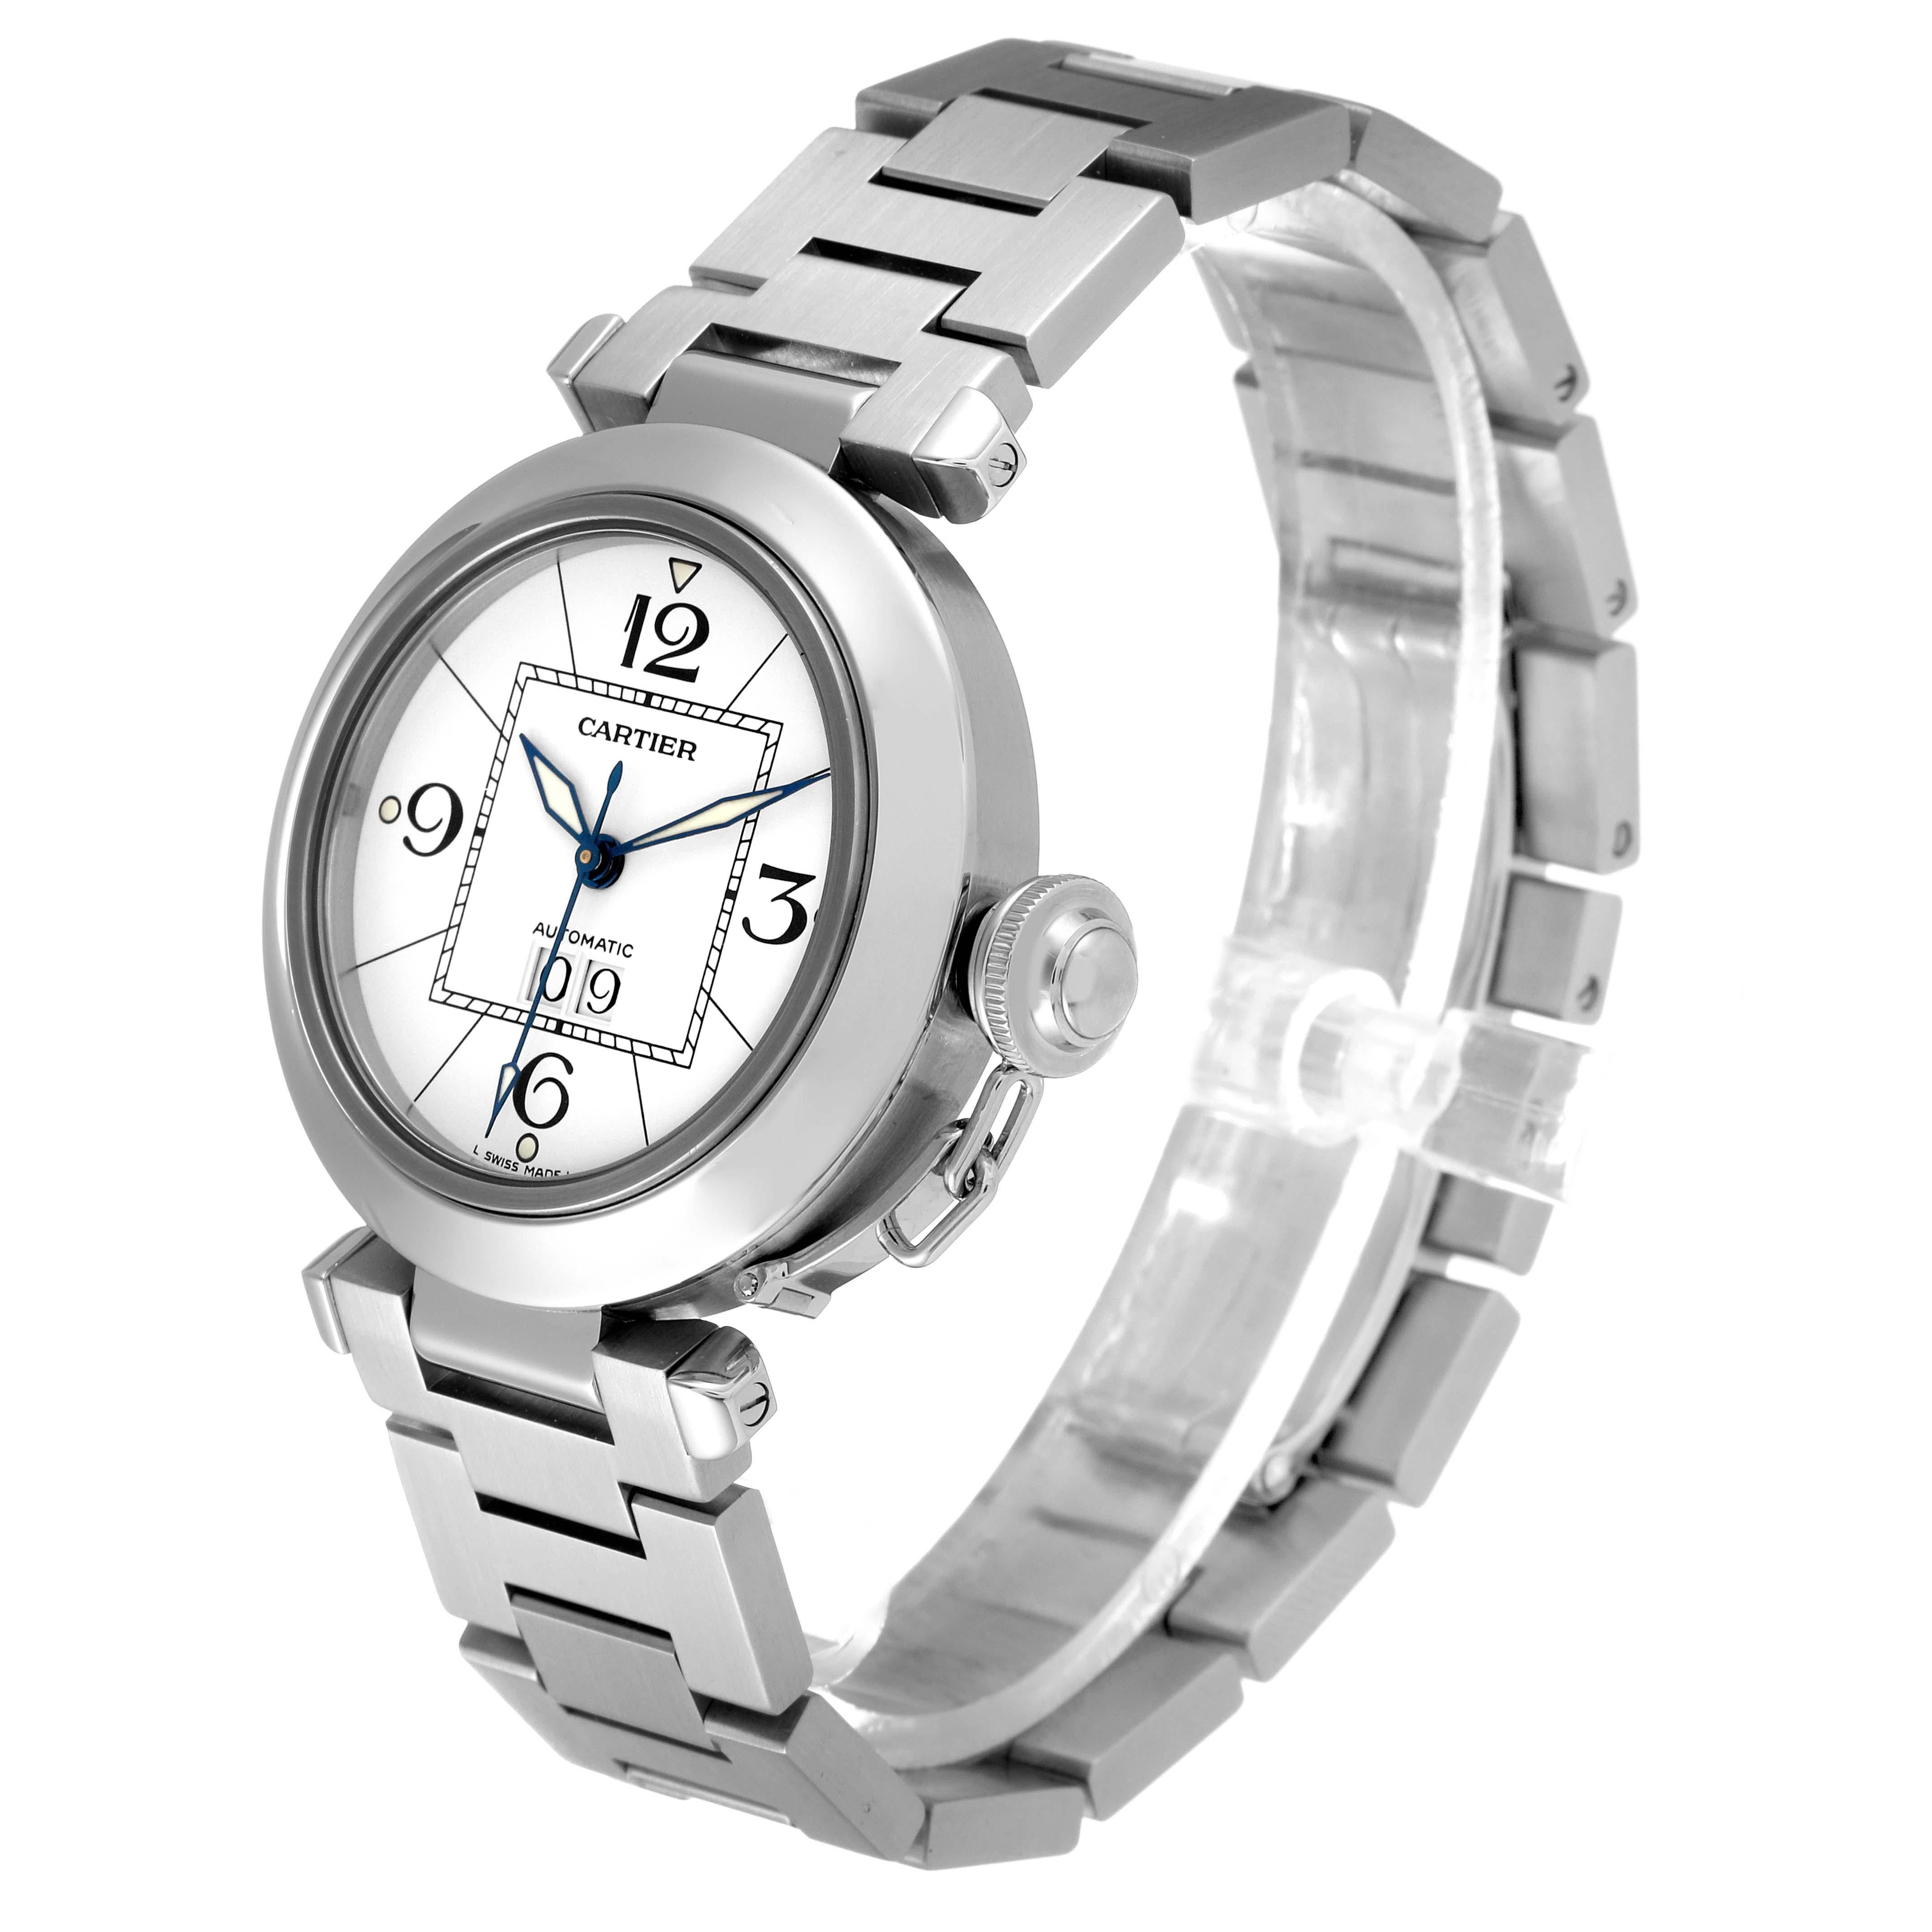 Cartier Pasha C Big Date Midsize Steel White Dial Mens Watch W31055M7 Box Papers. Automatic self-winding movement. Polished and brushed stainless steel case 35.0 mm in diameter. Caseback with 8 screws. Screw down crown cover. Stainless steel concave